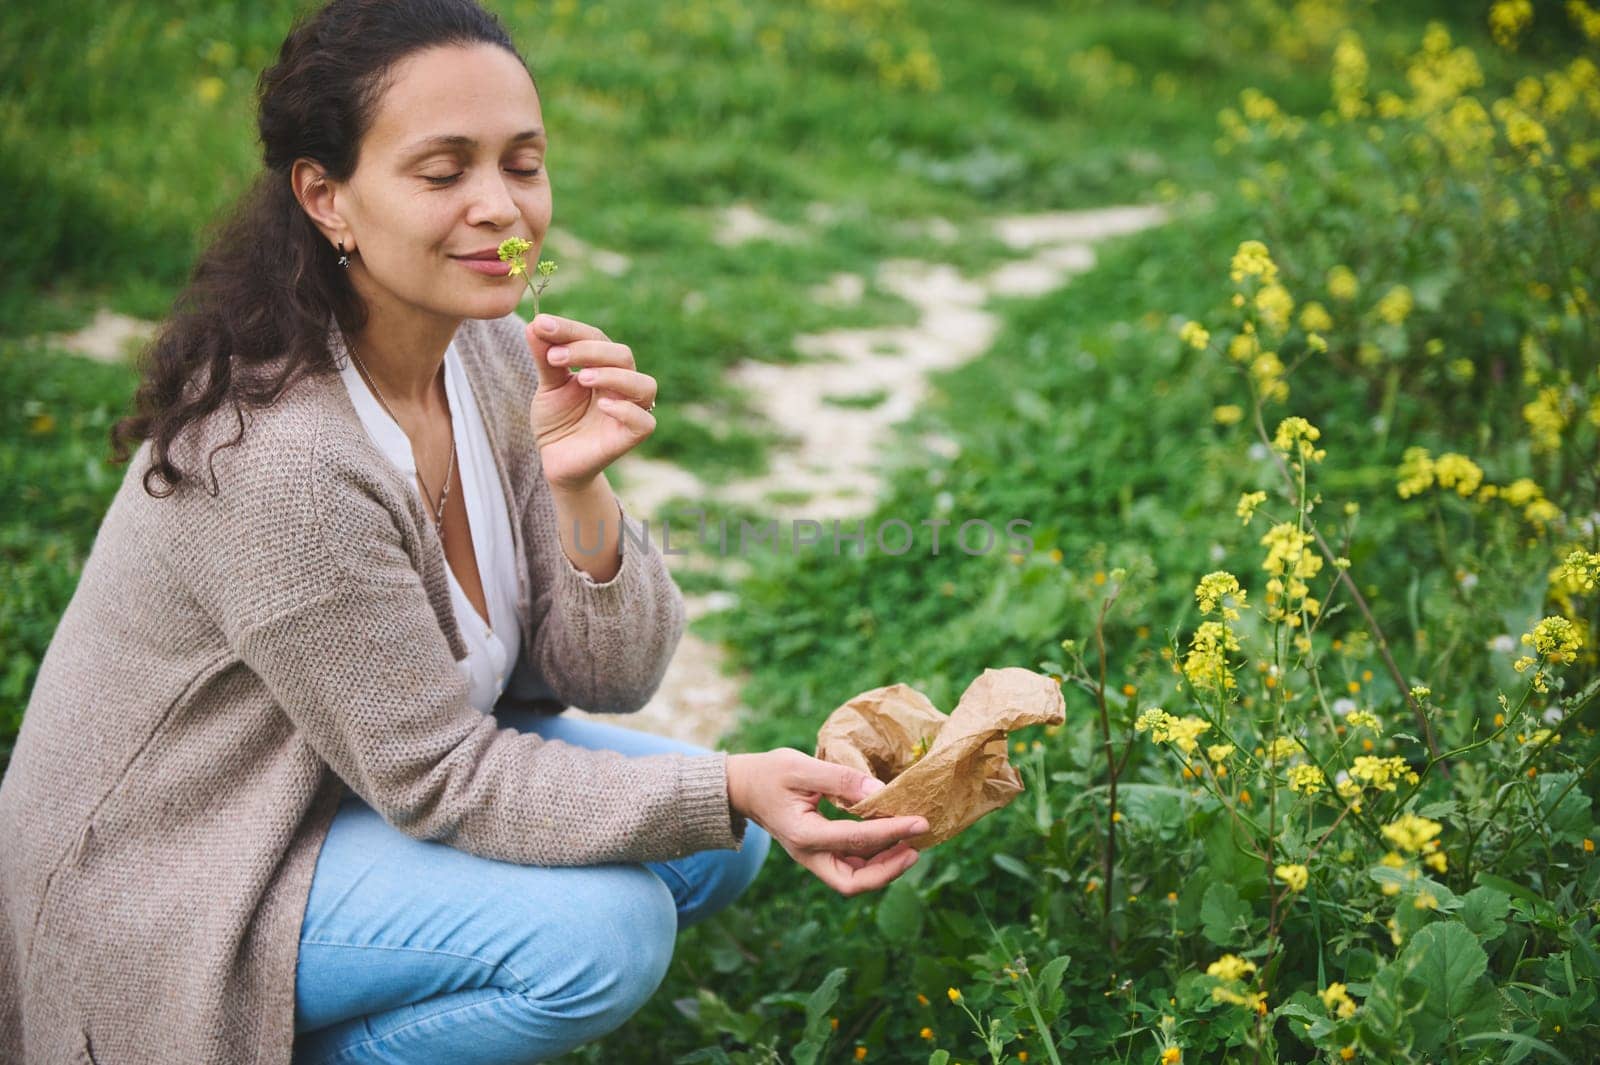 Happy smiling woman herbalist, botanist sniffing flower while picking medicinal herbs for aromatherapy or preparing herbal tea according to traditional recipe. Naturopathy. Herbal alternative medicine